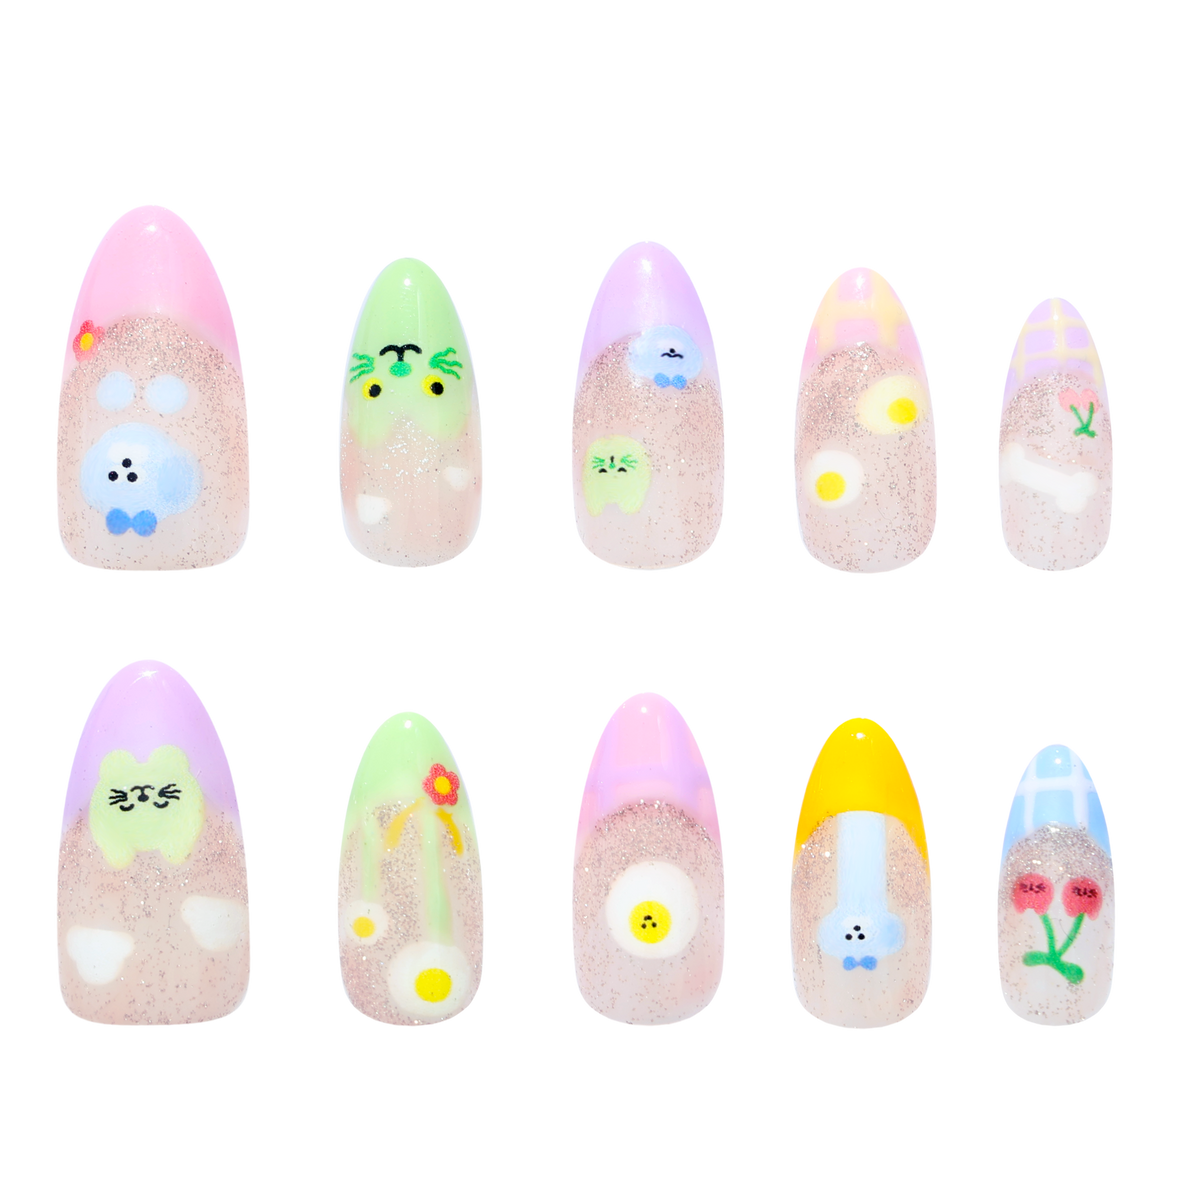 Share Time With You - Press-On Nail